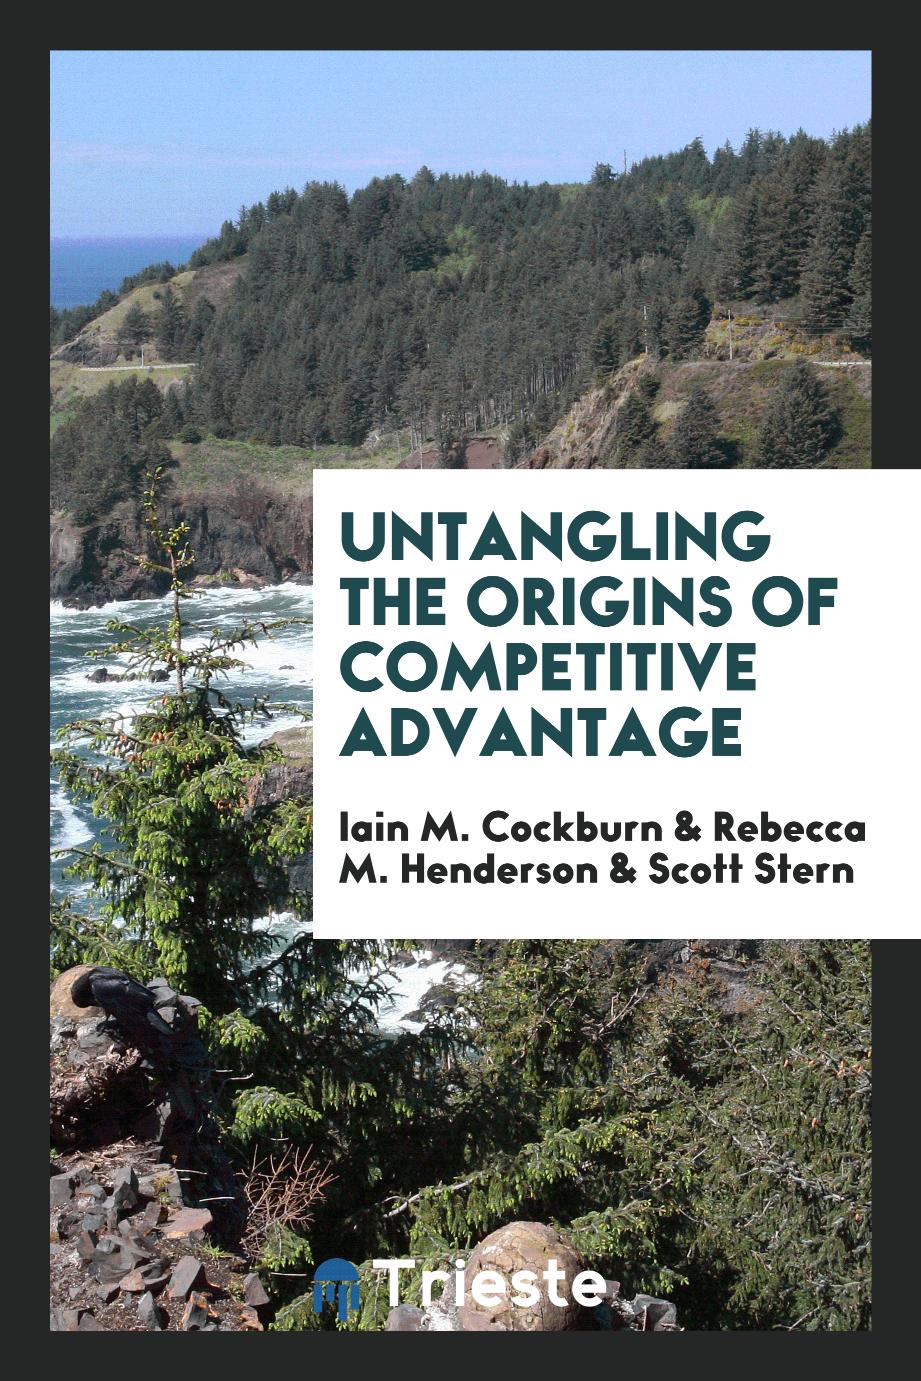 Untangling the origins of competitive advantage